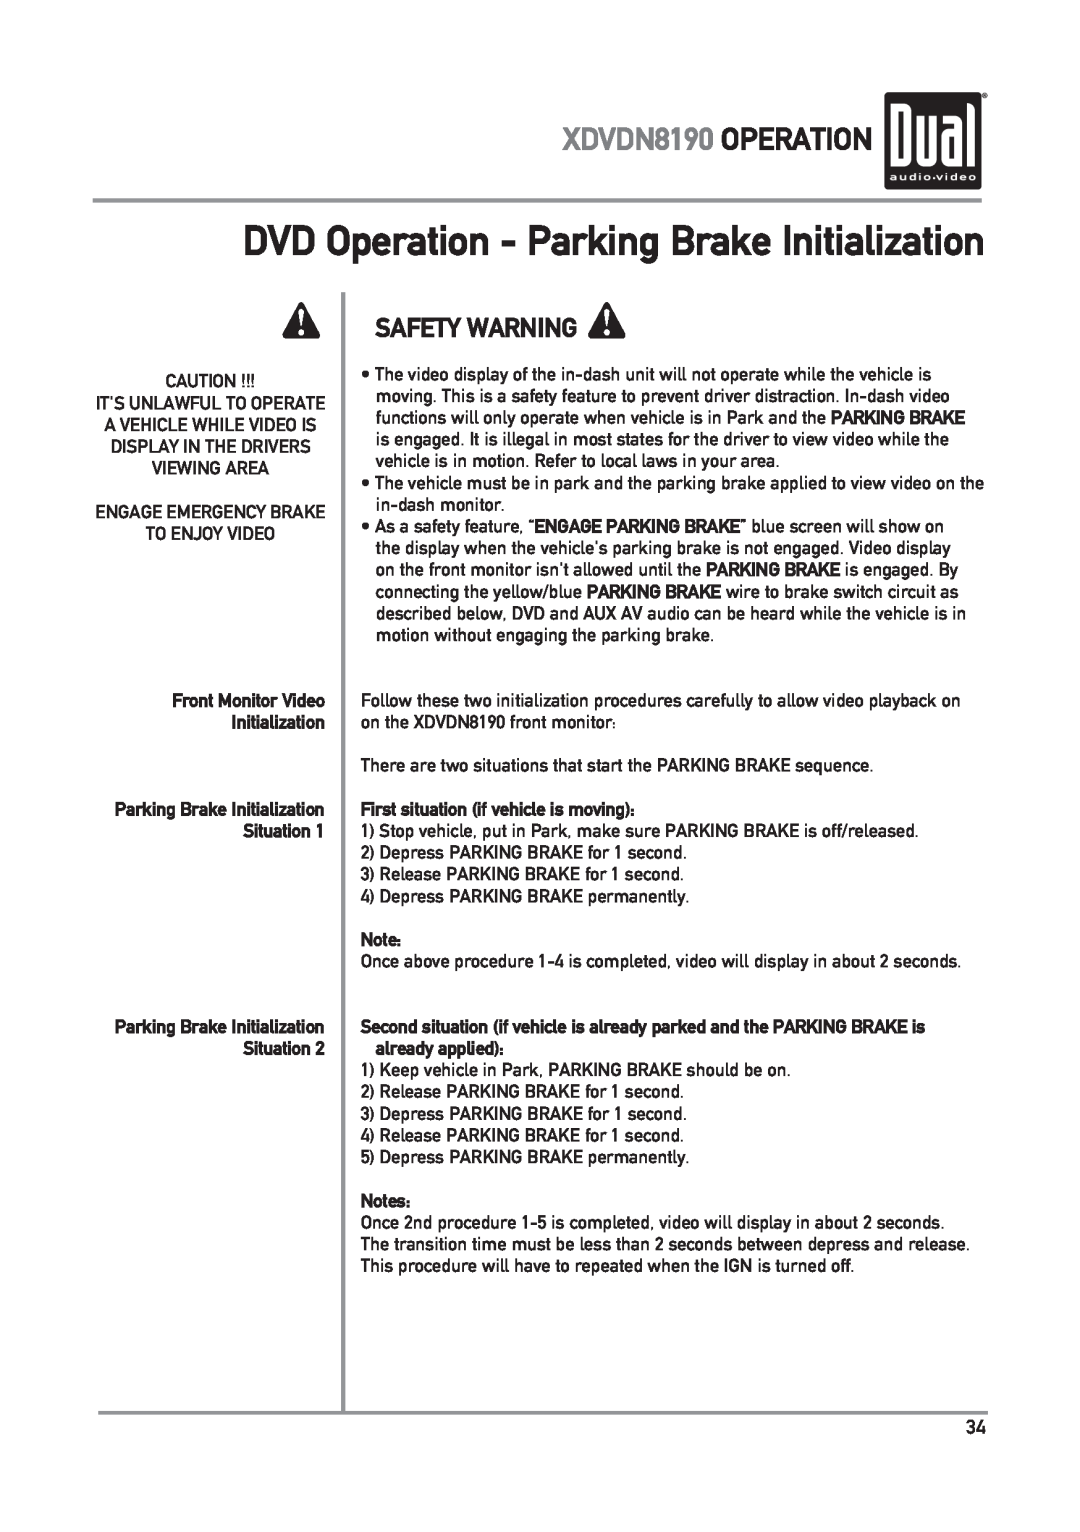 Dual owner manual DVD Operation - Parking Brake Initialization, XDVDN8190 OPERATION, Safety Warning, Notes 